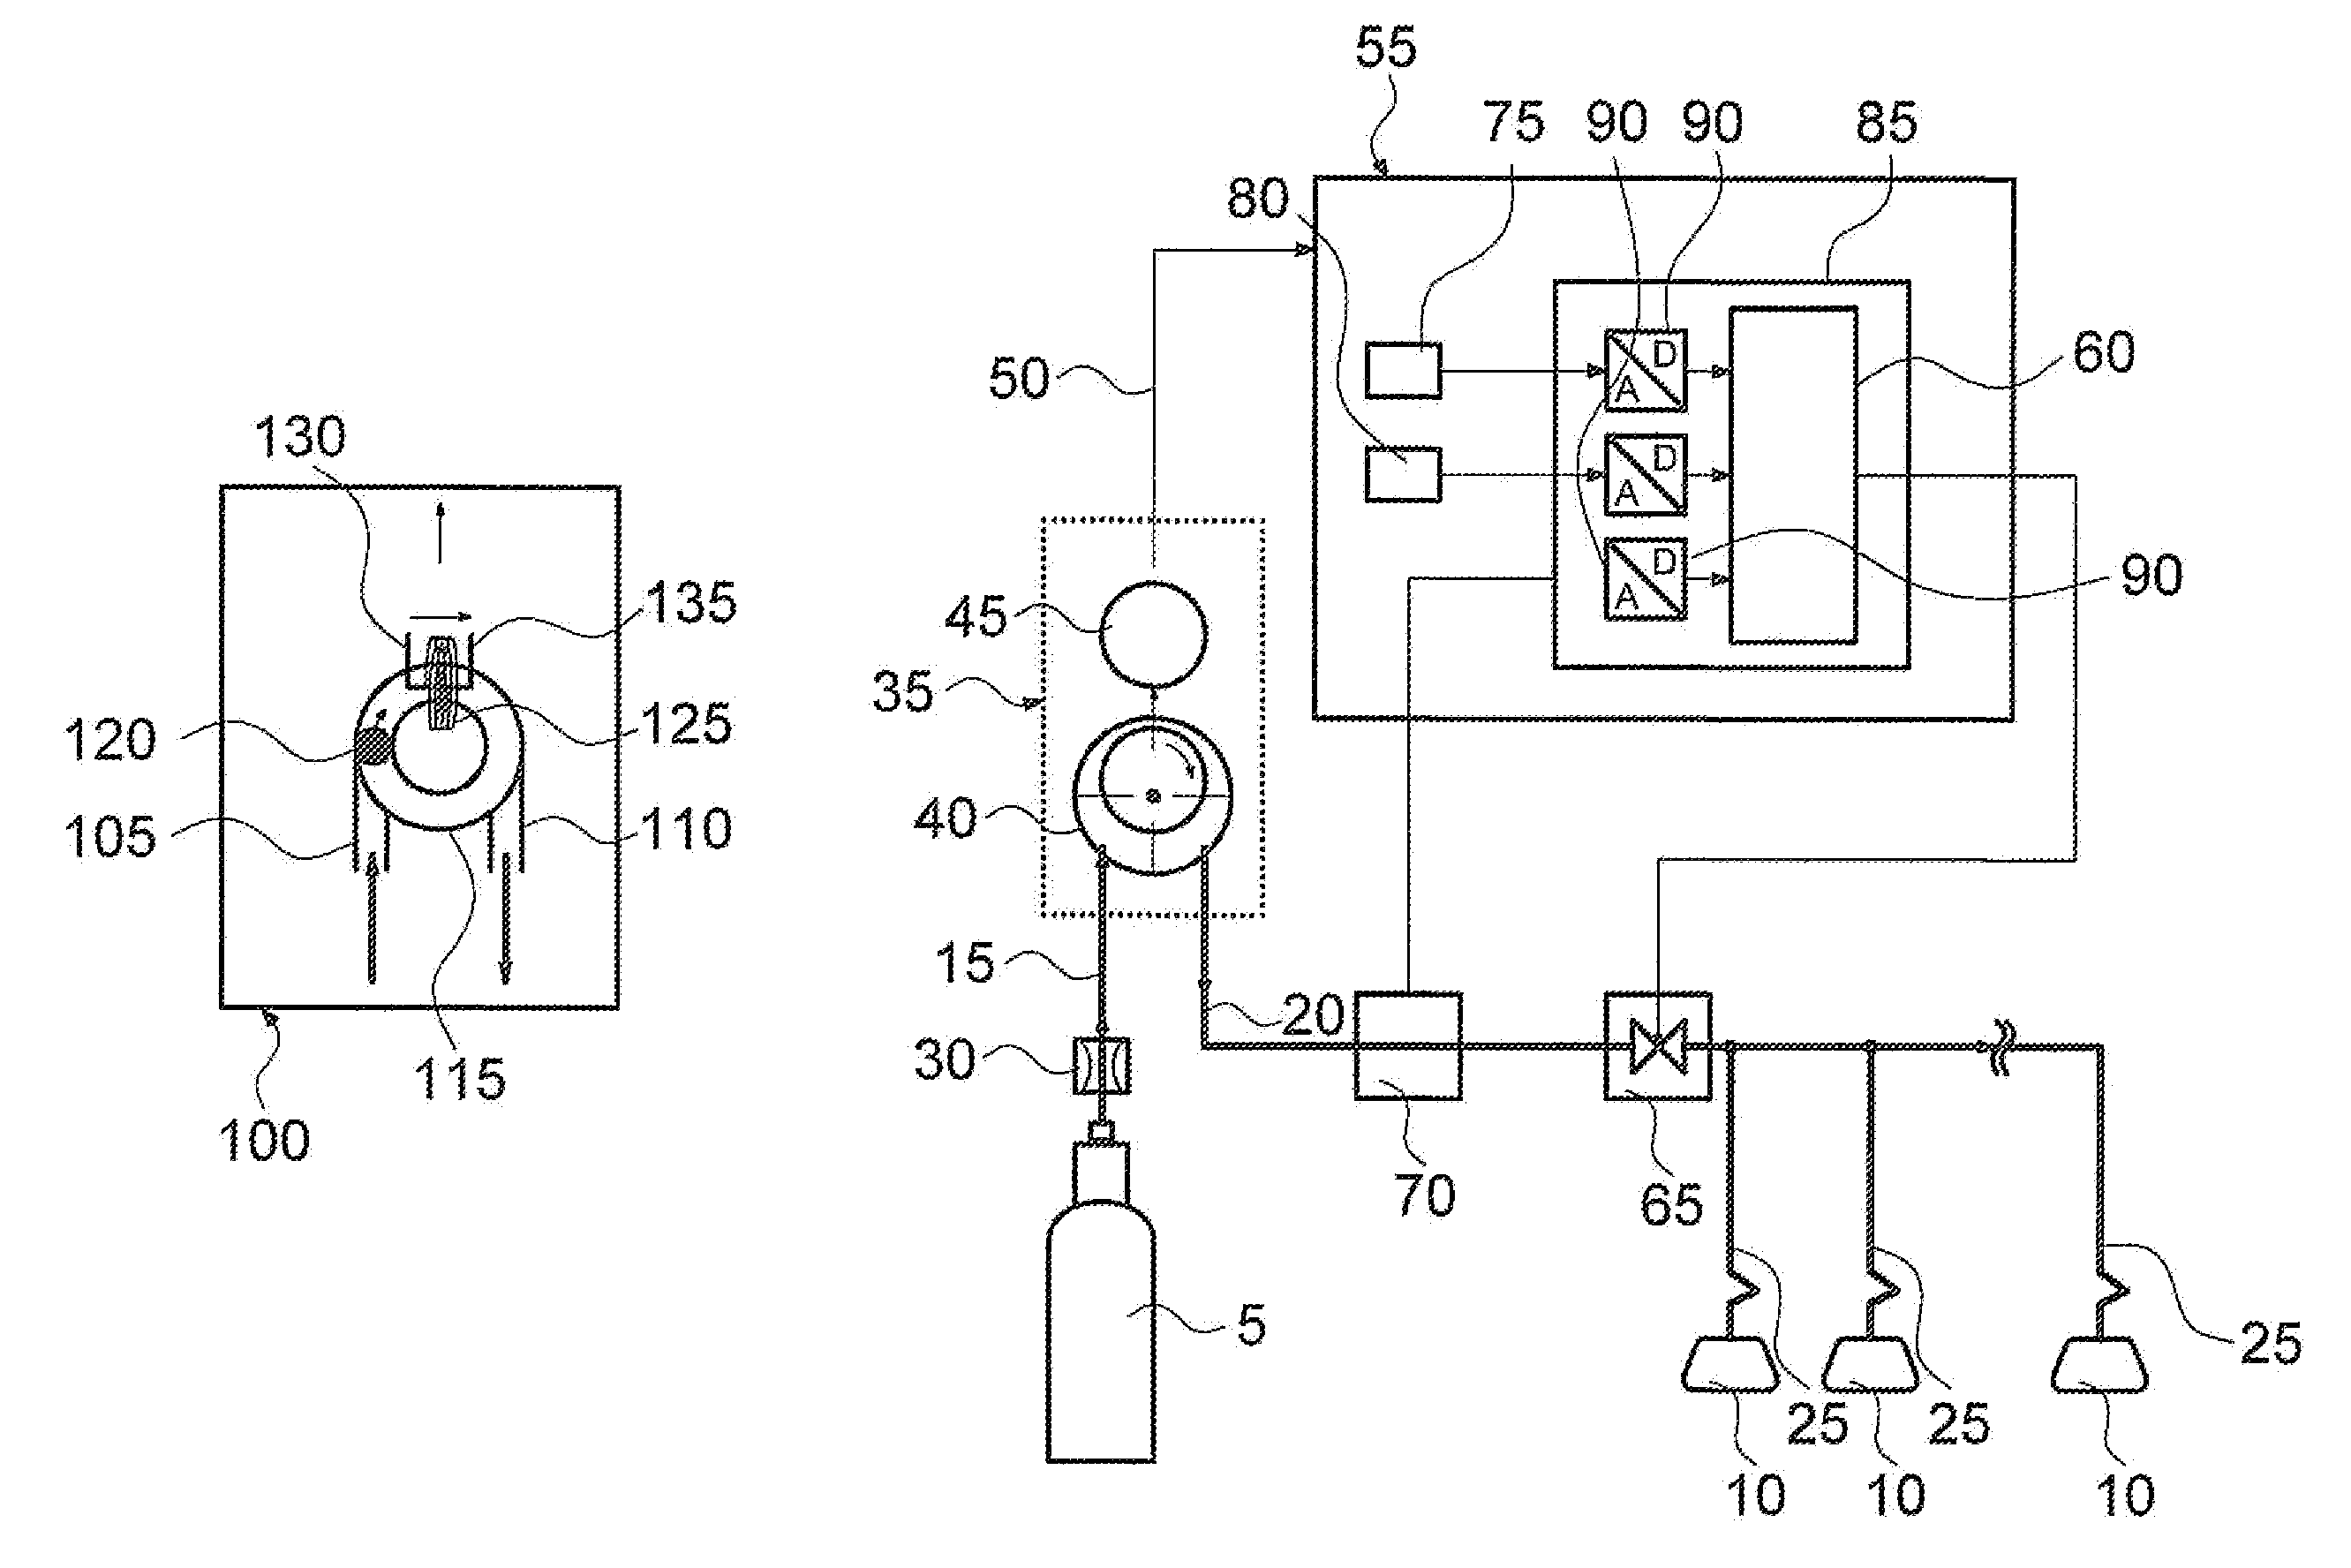 Method and device for controlling the pressure and/or flow rate of fluid